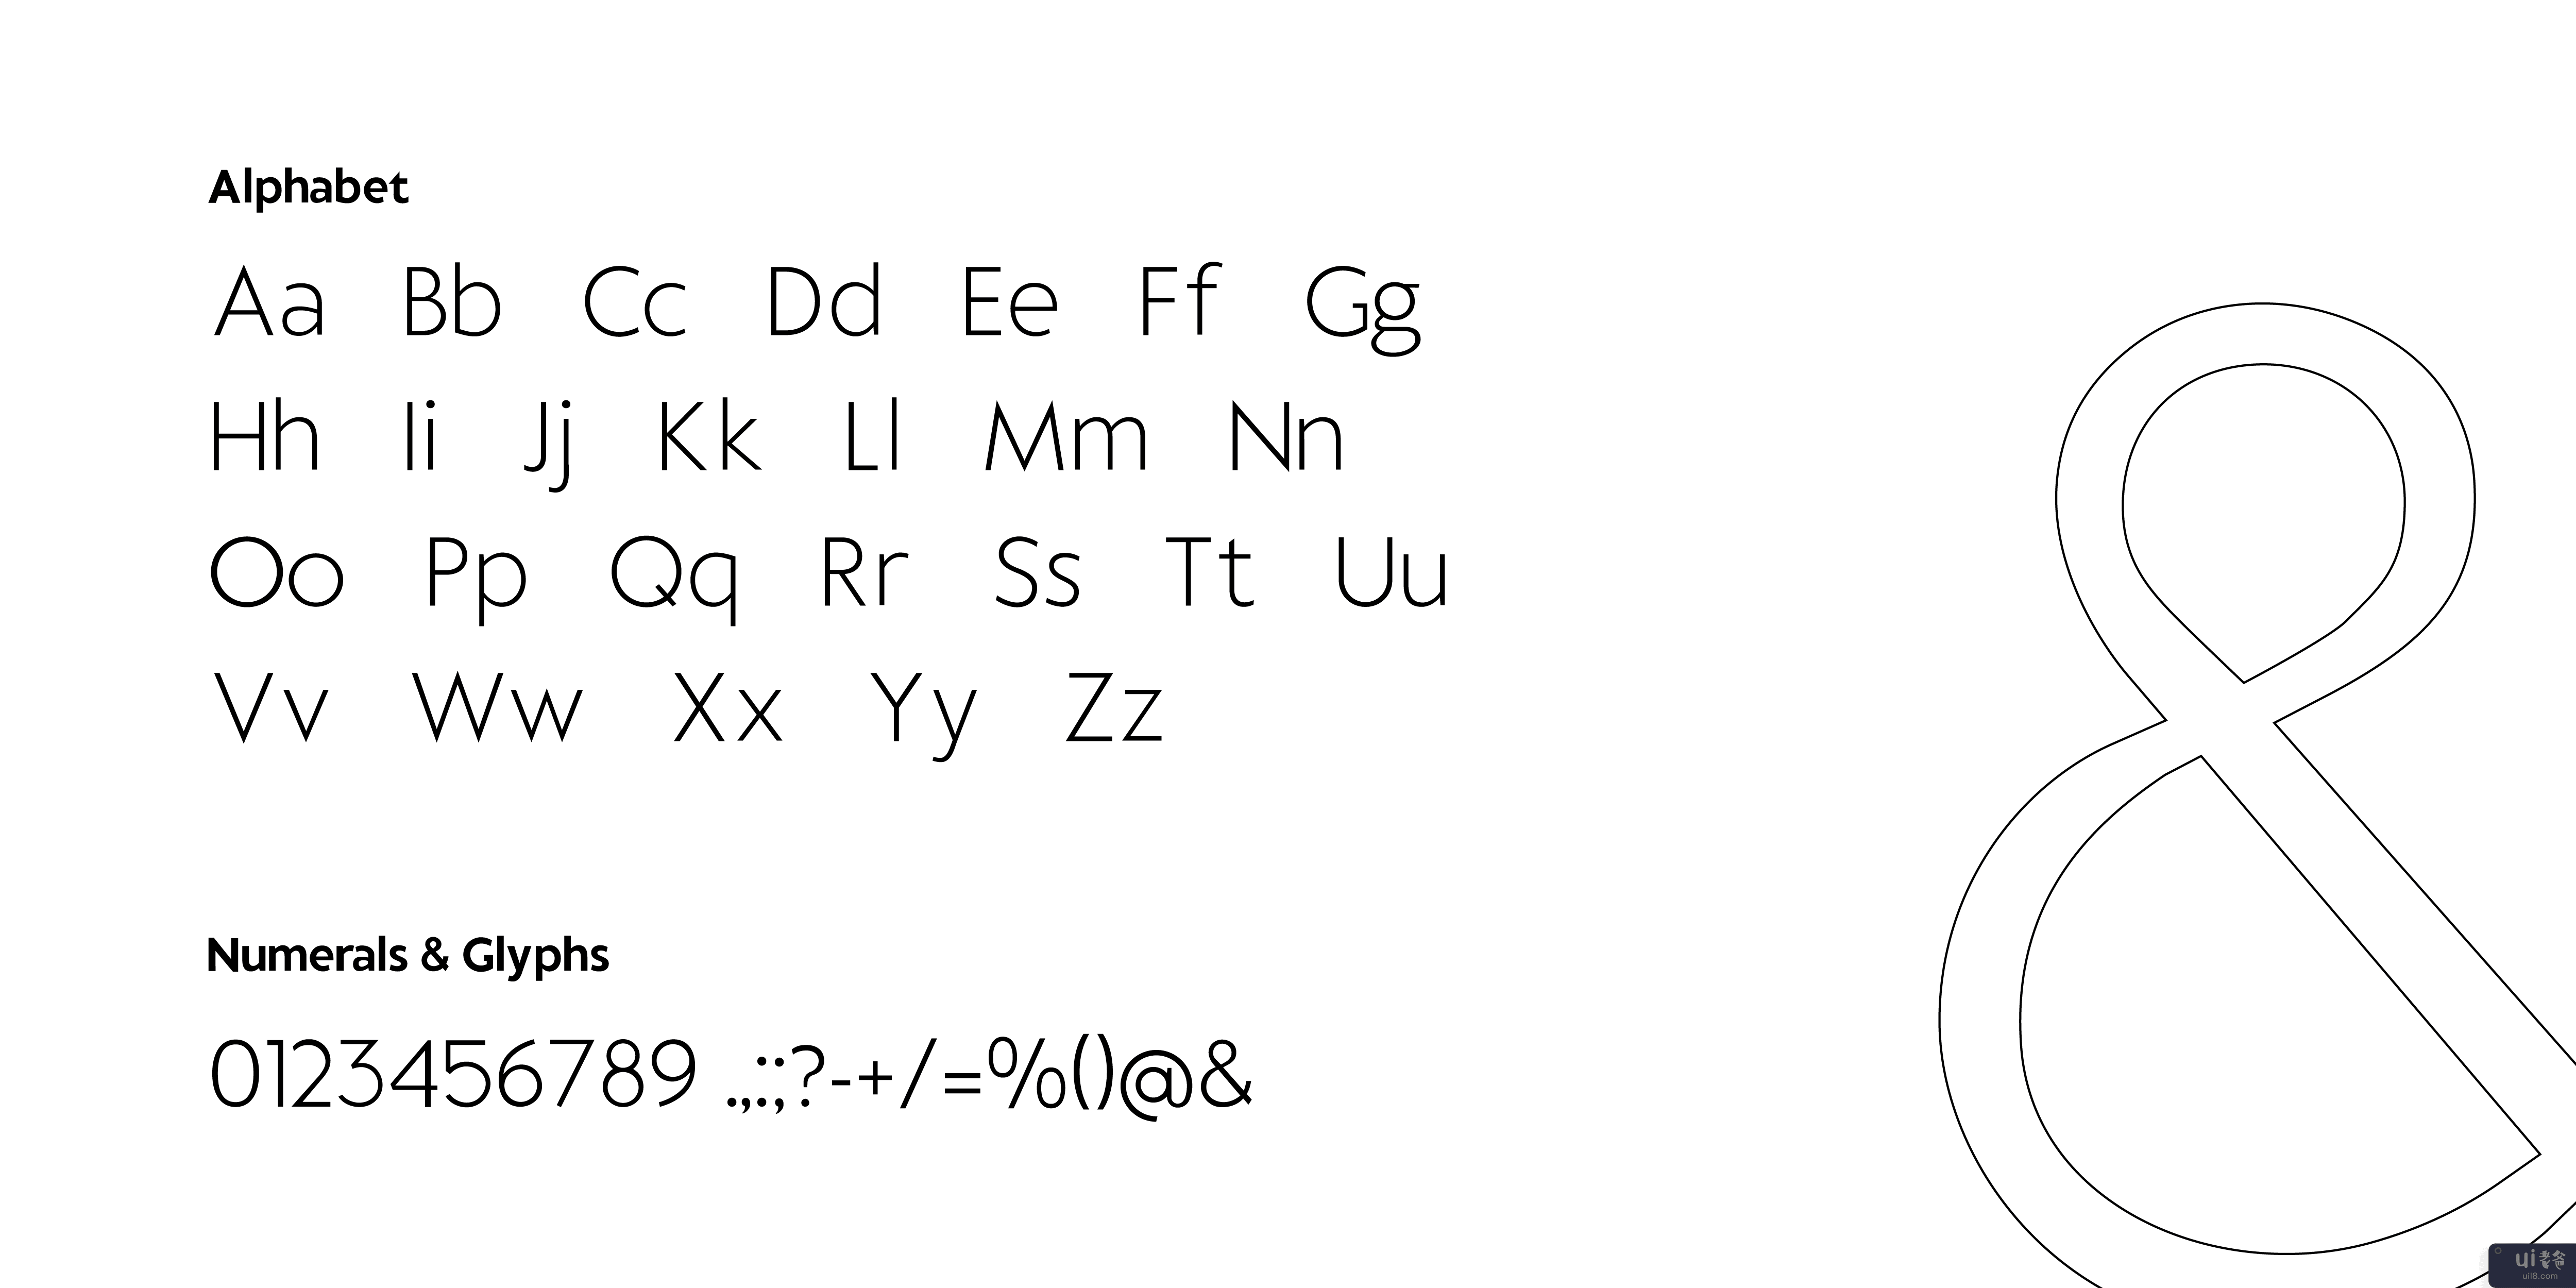 Contisans 字体系列（3 个粗细）(Contisans Font Family (3 weights))插图1